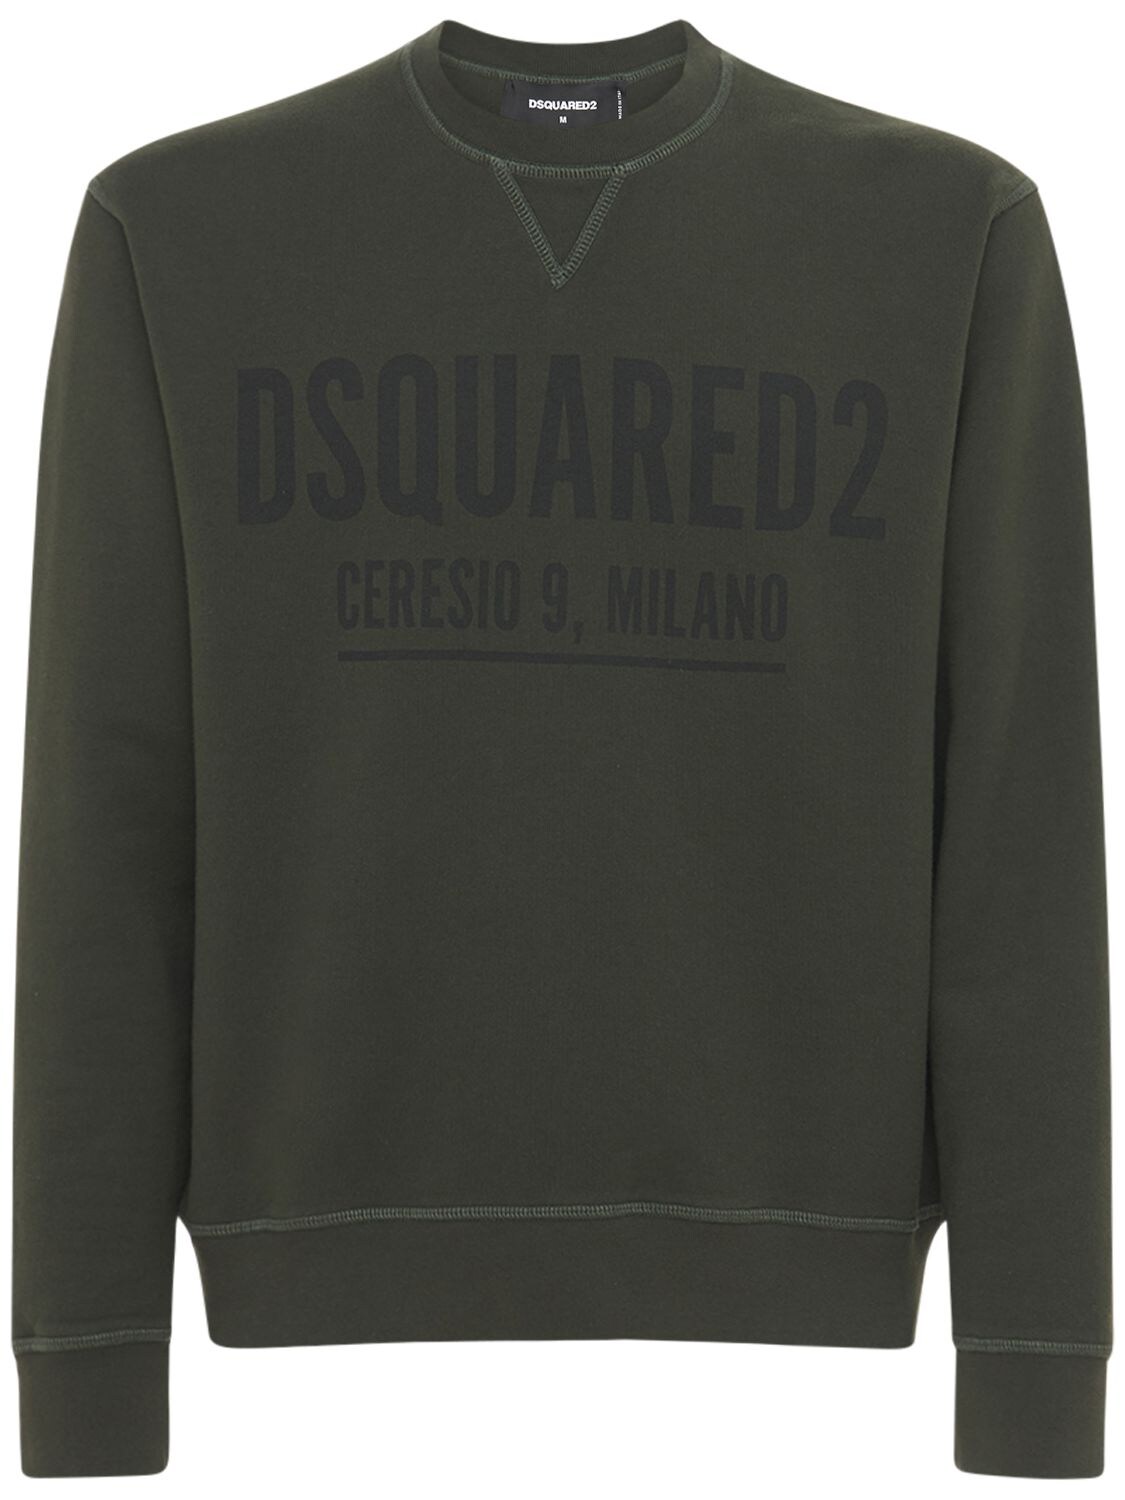 Dsquared2 Ceresio 9 Print Cotton Jersey Sweatshirt In Military Green